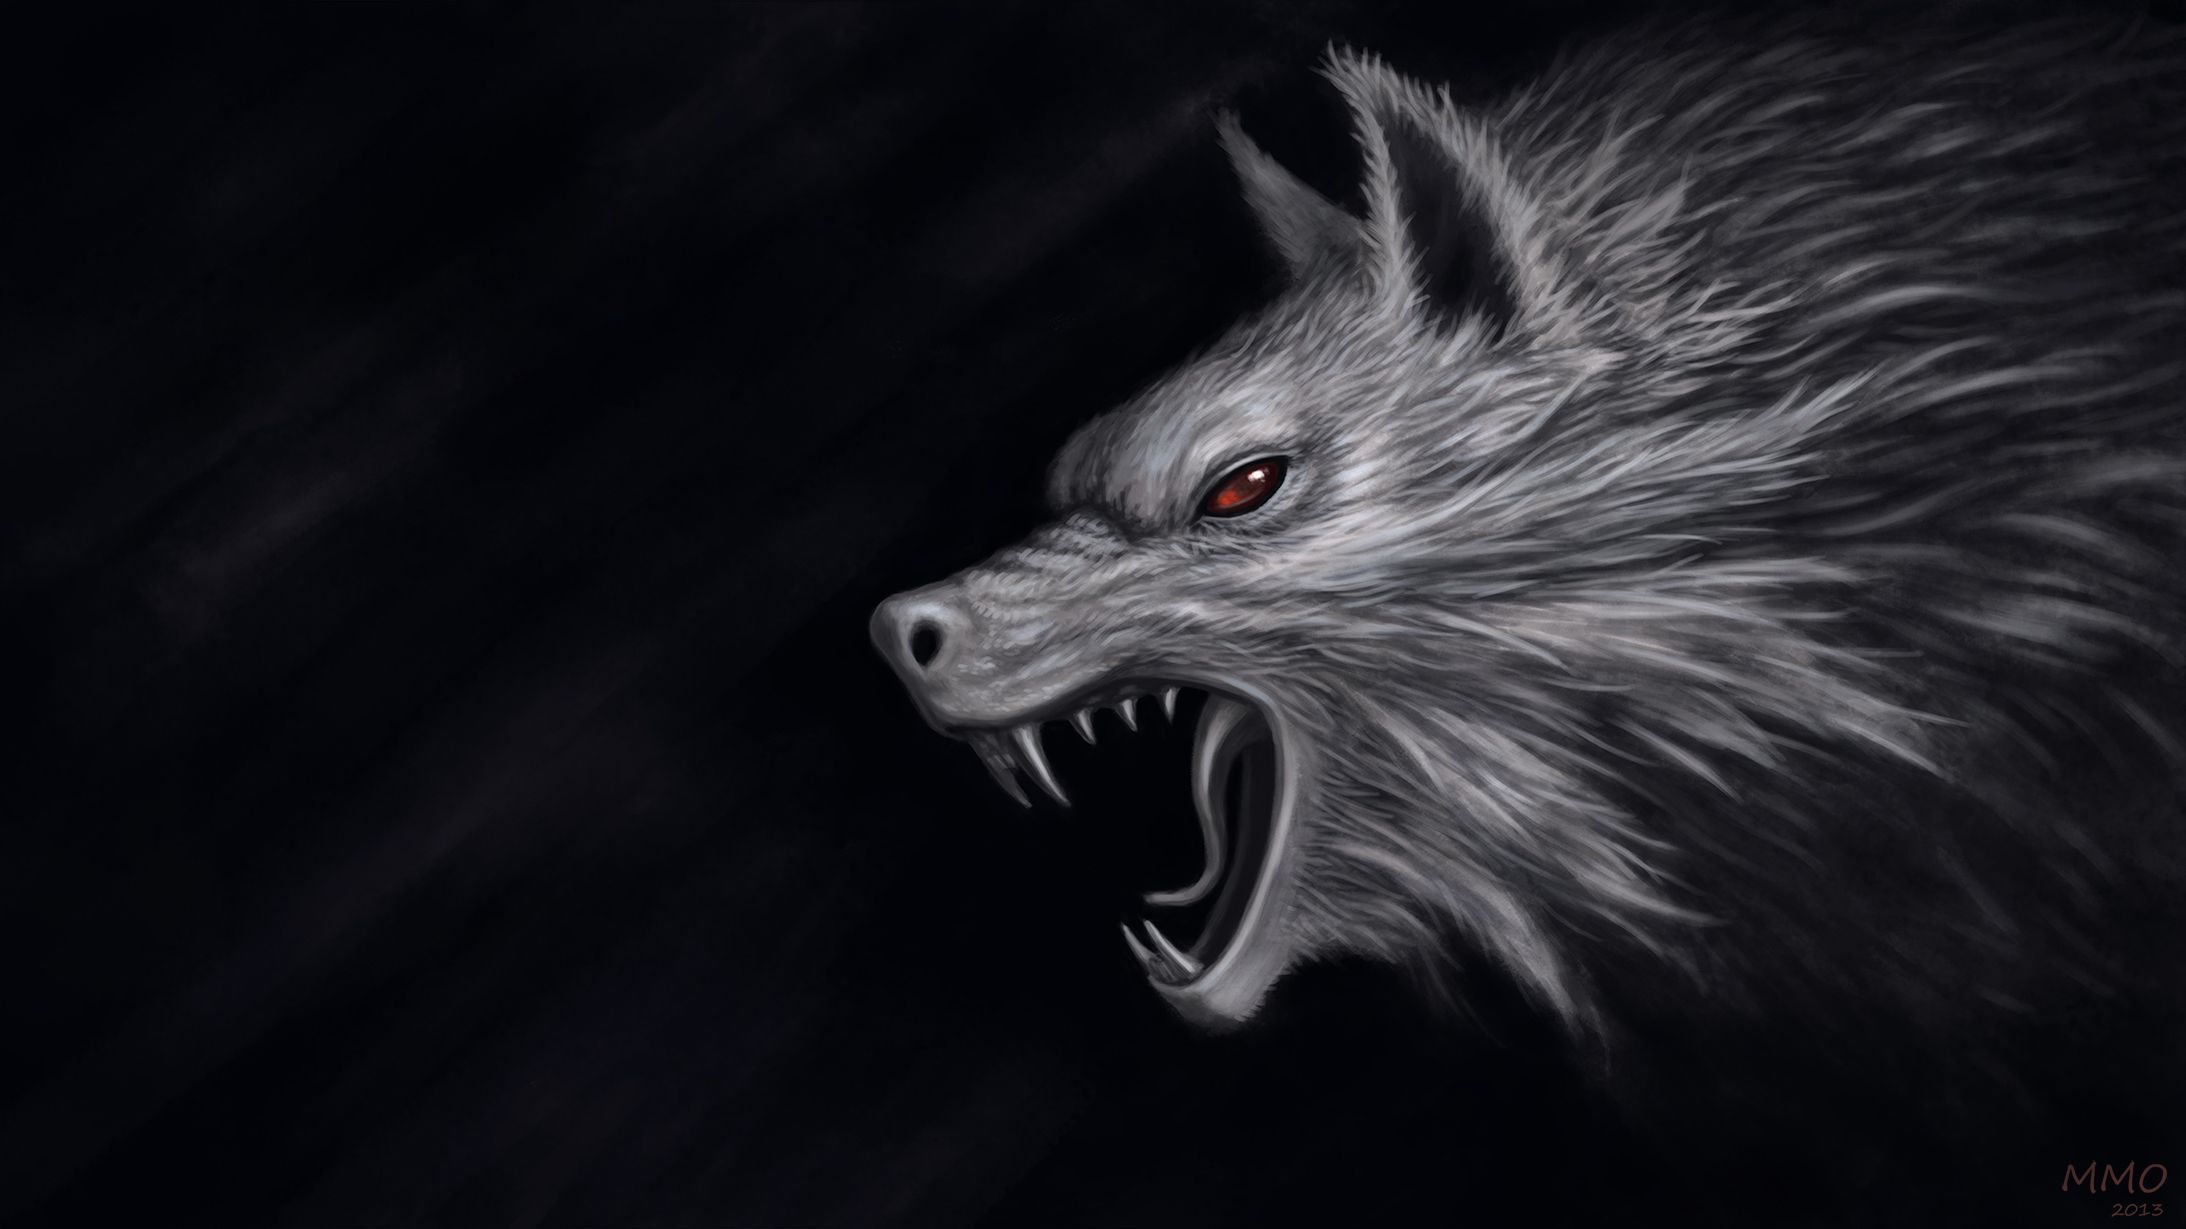 Scary Werewolf Picture Wallpapers